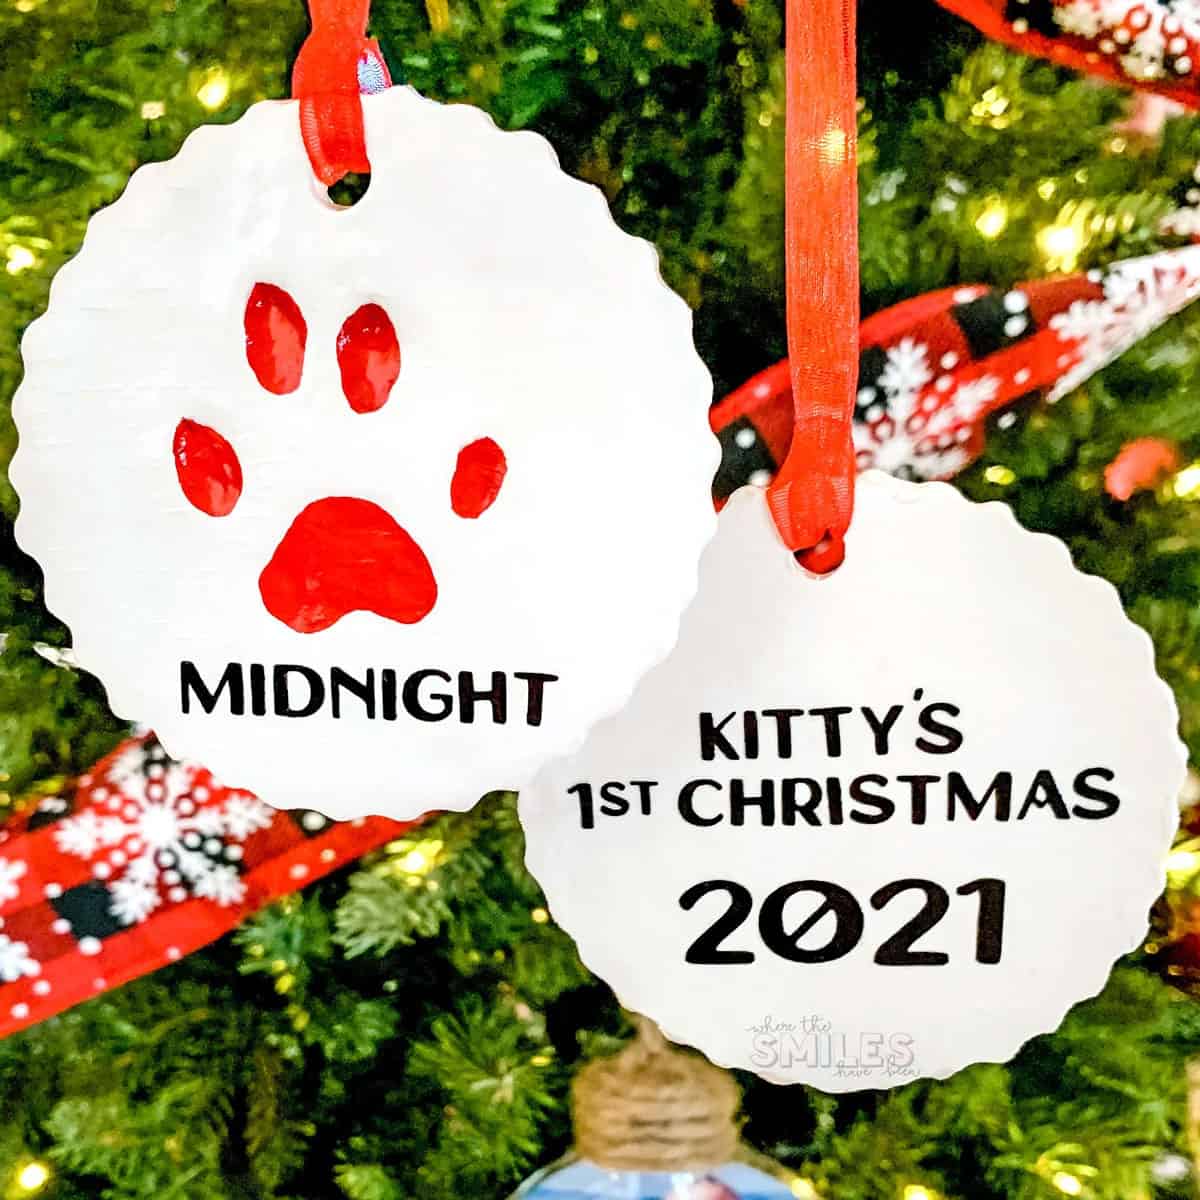 White clay Christmas tree ornaments hung with red ribbon- one with red paw print and both with black etching commemorating pets.